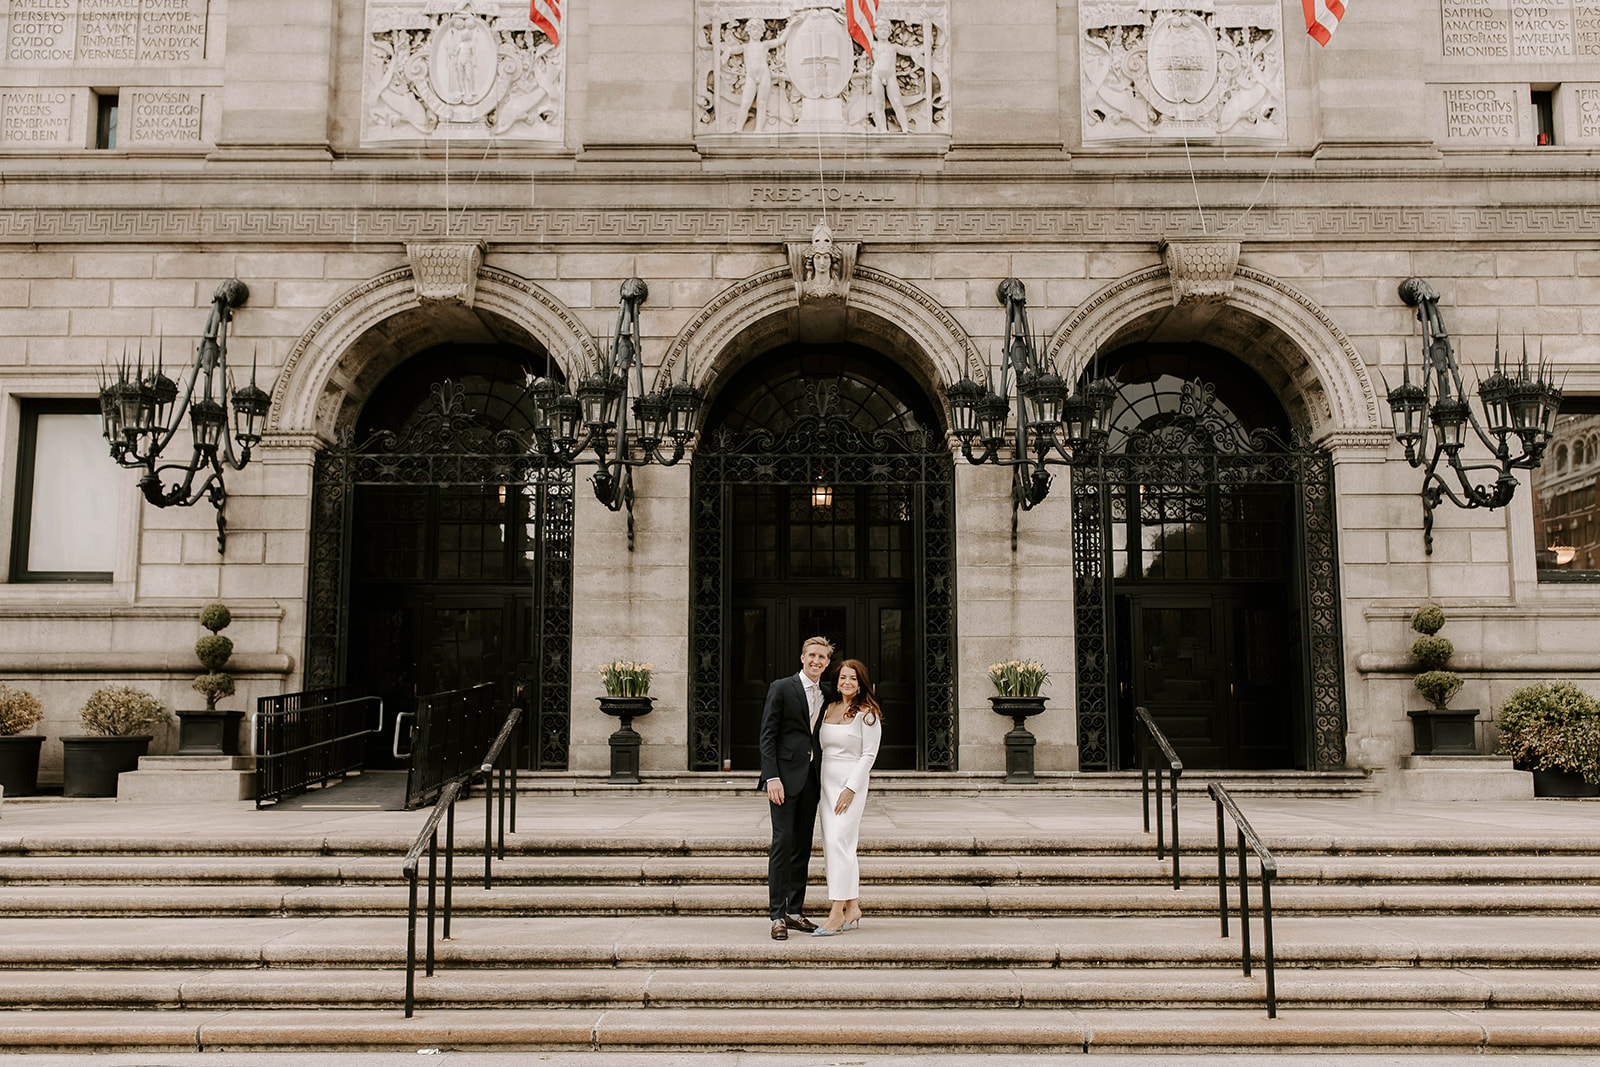 Stunning bride and groom pose together after their dreamy Boston public library wedding